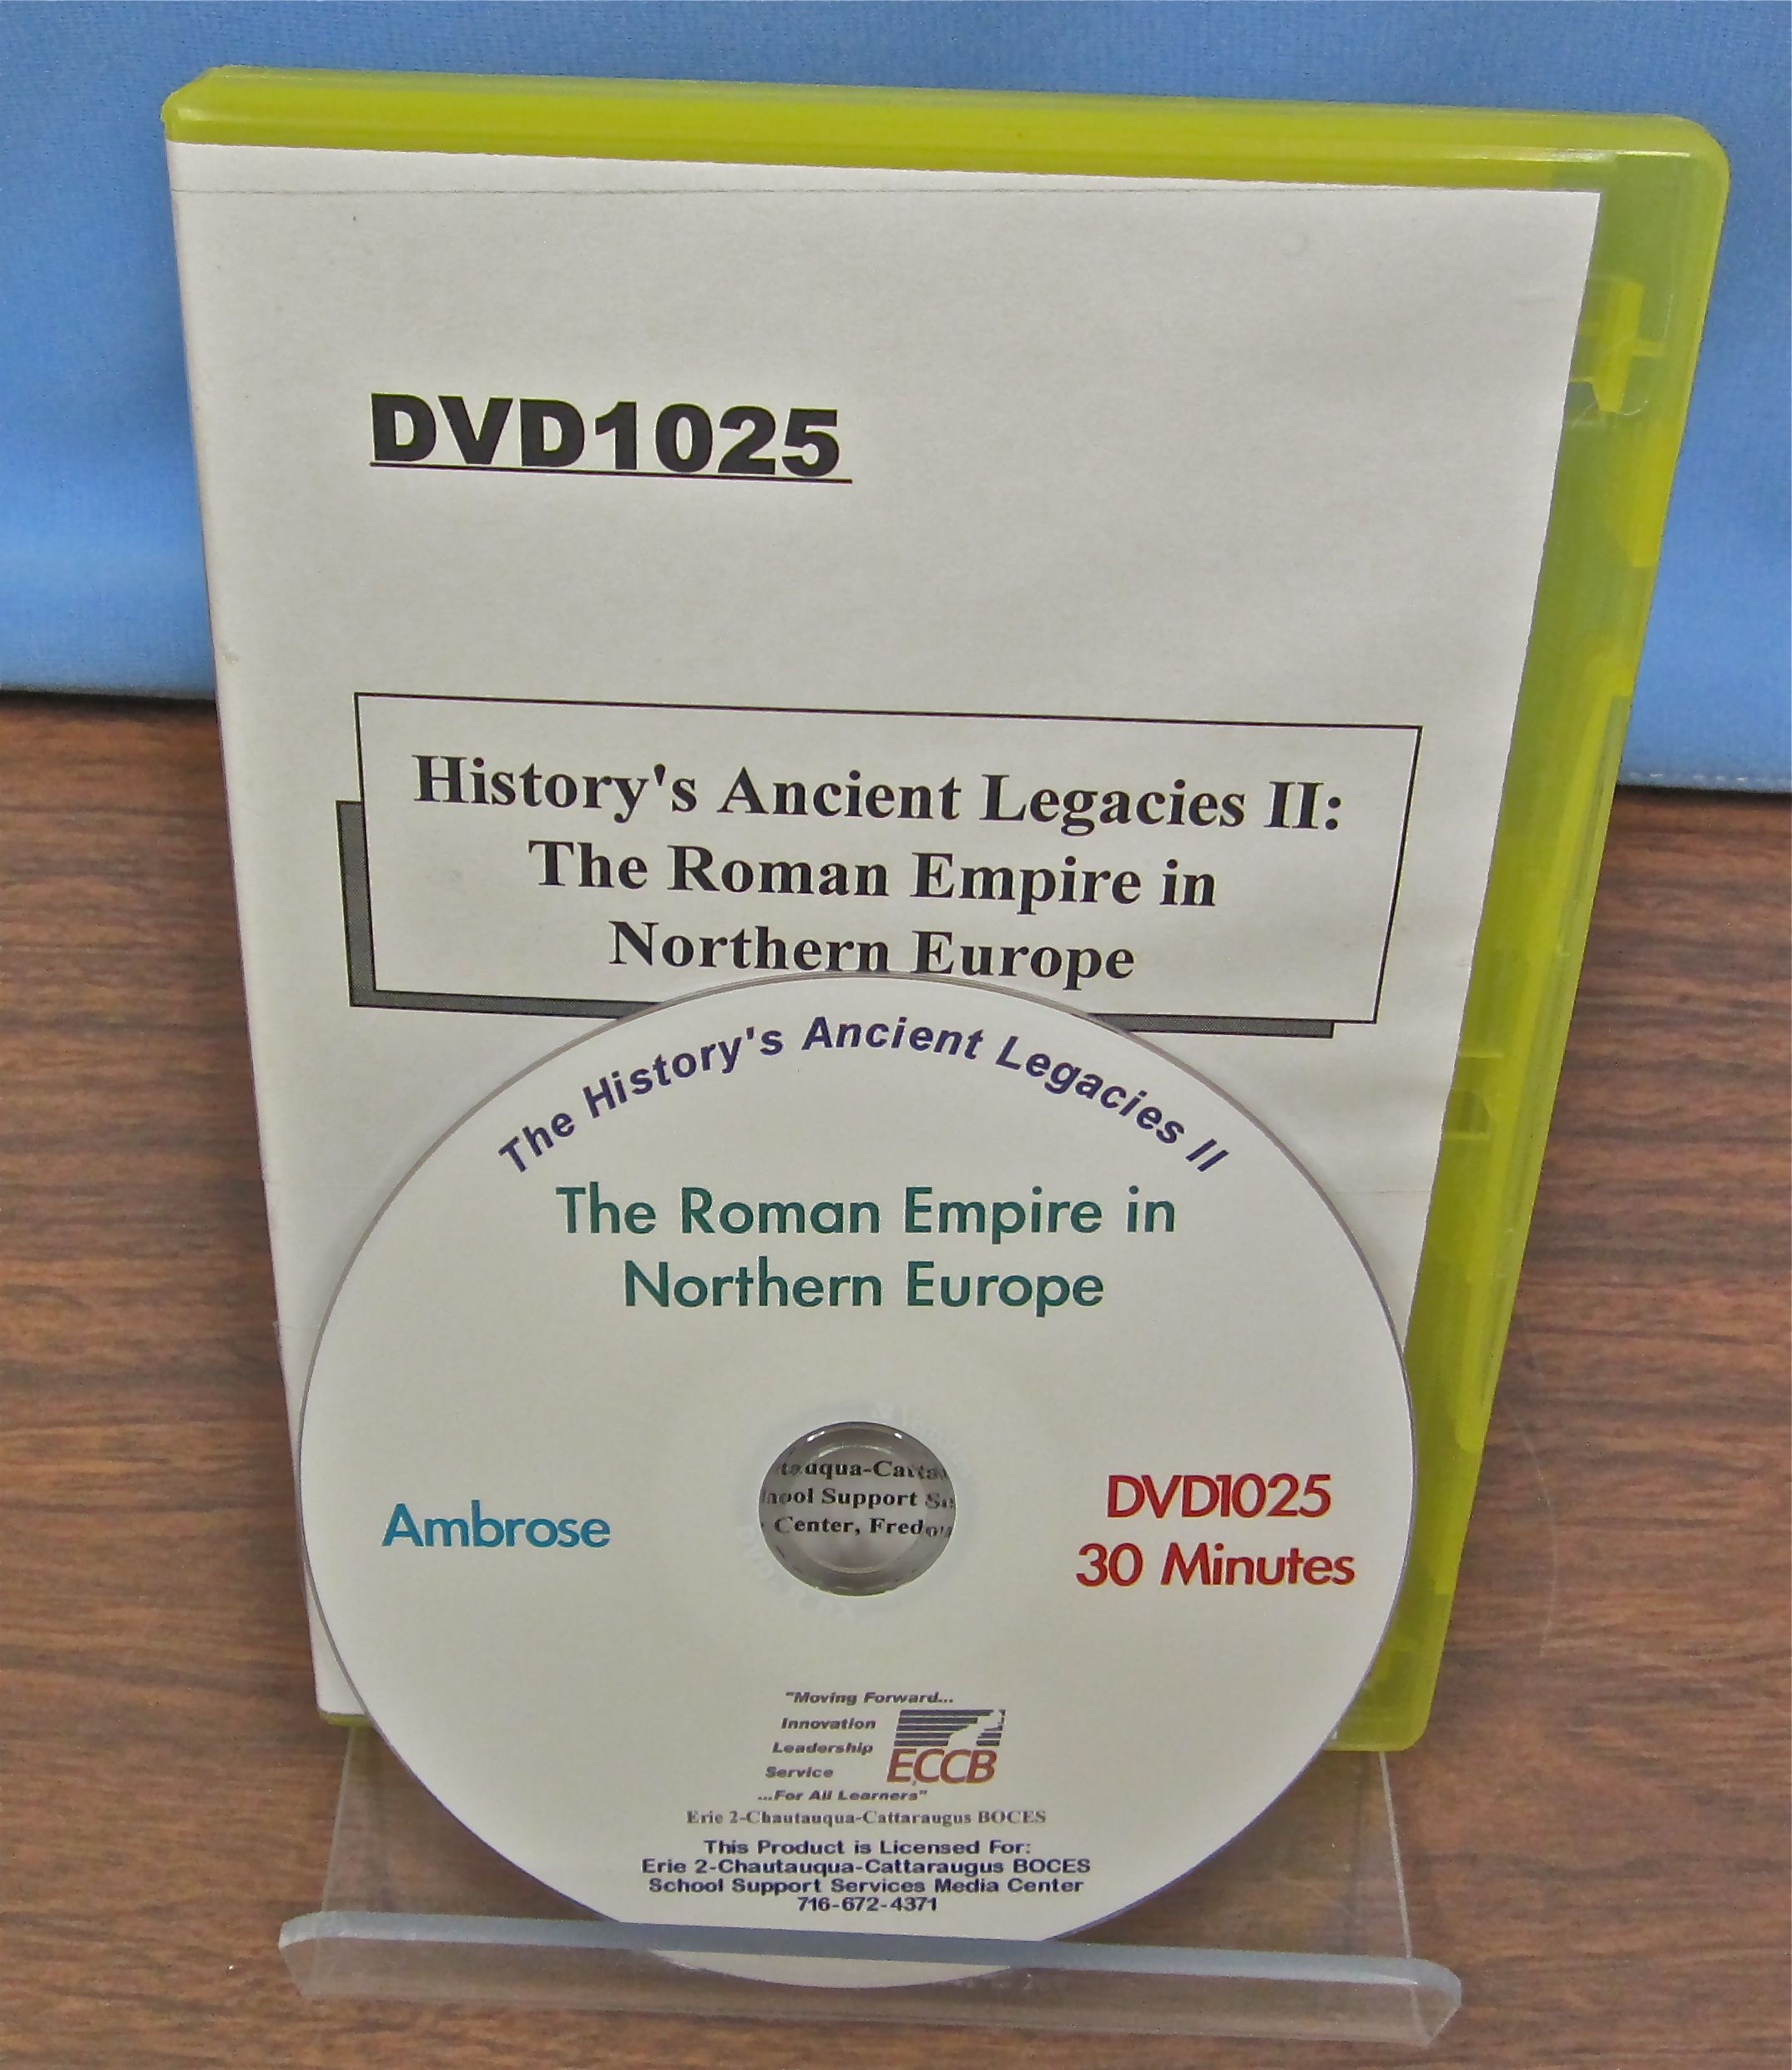 History's Ancient Legacies II: The Roman Empire in Northern Europe